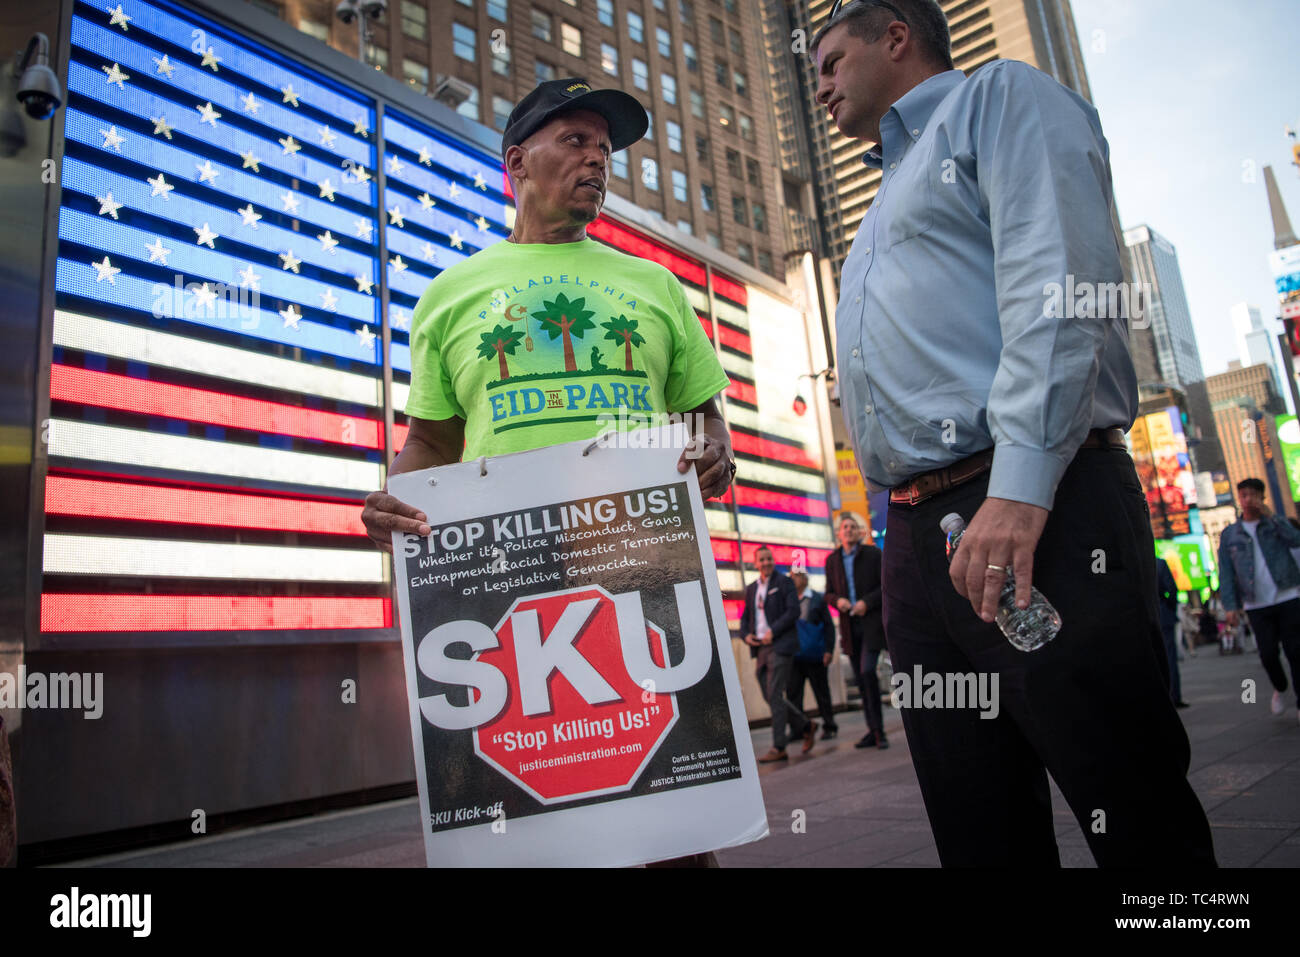 Jamal Johnson, disabled Marine Veteran, center, talking to a BLM supporter. - On June 4, 2019, protesters rallied in Times Square in New York City demanding the firing of Officer Pantaleo for the choking death of Eric Garner in 2014. Daniel Pantaleo is currently standing administrative trial which began on May 13. On May 21, the judge overseeing his case delayed the remainder of the hearing until June 5, 2019. Pantaleo has been on desk duty since Eric Garner's death and could face penalties ranging from loss of vacation days to firing from the NYPD. (Photo by Gabriele Holtermann-Gorden/P Stock Photo